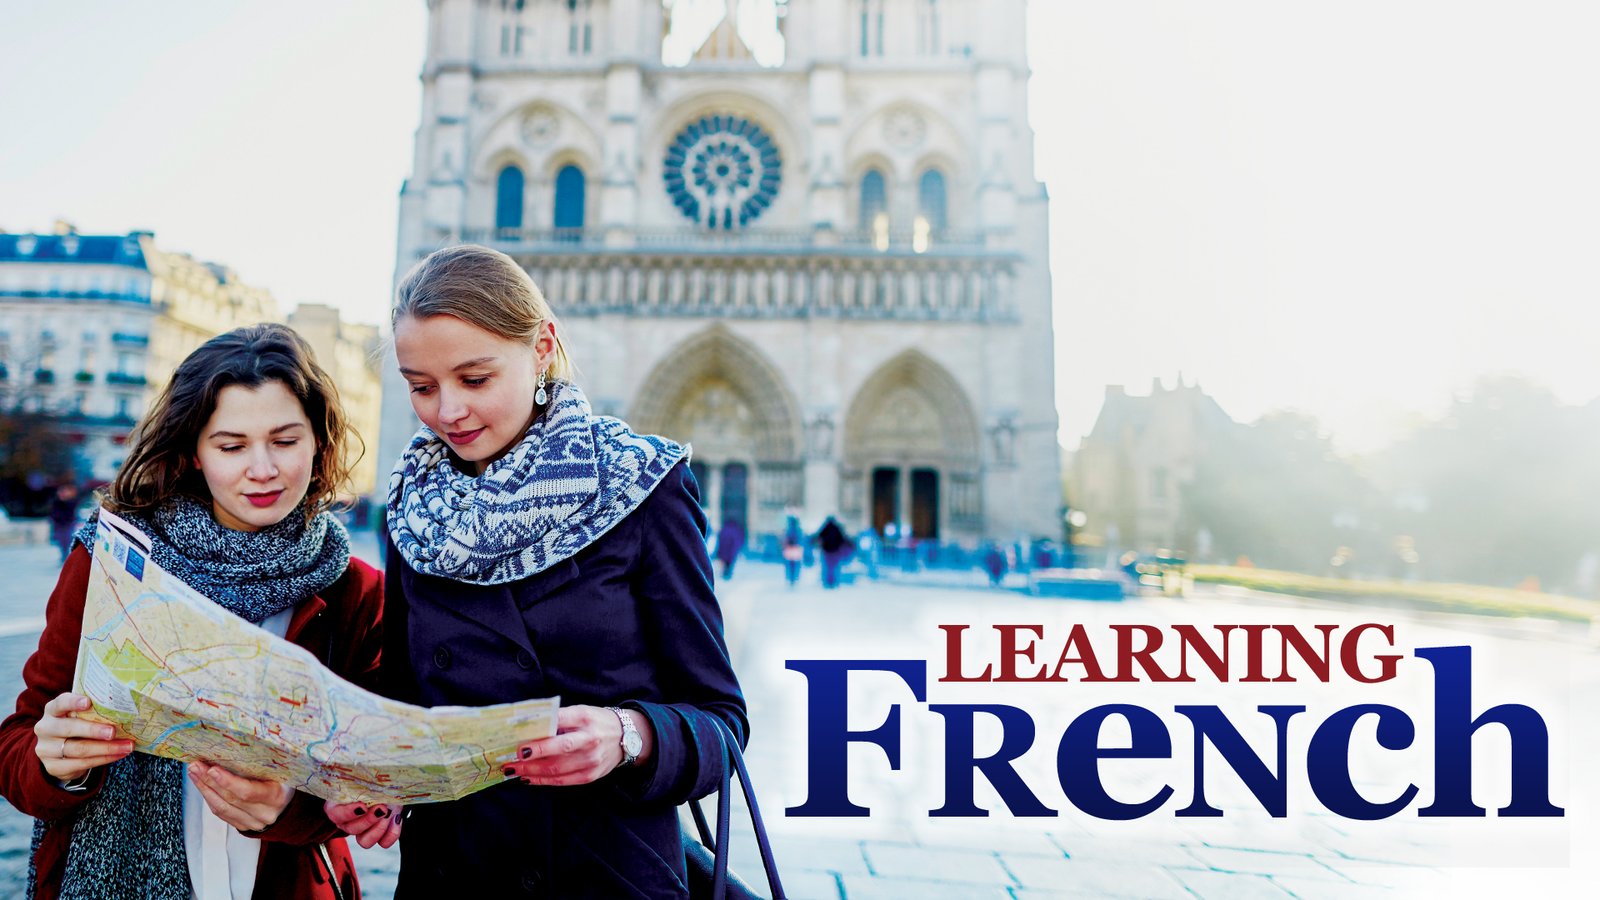 Learning French - A Rendezvous with French-Speaking Cultures